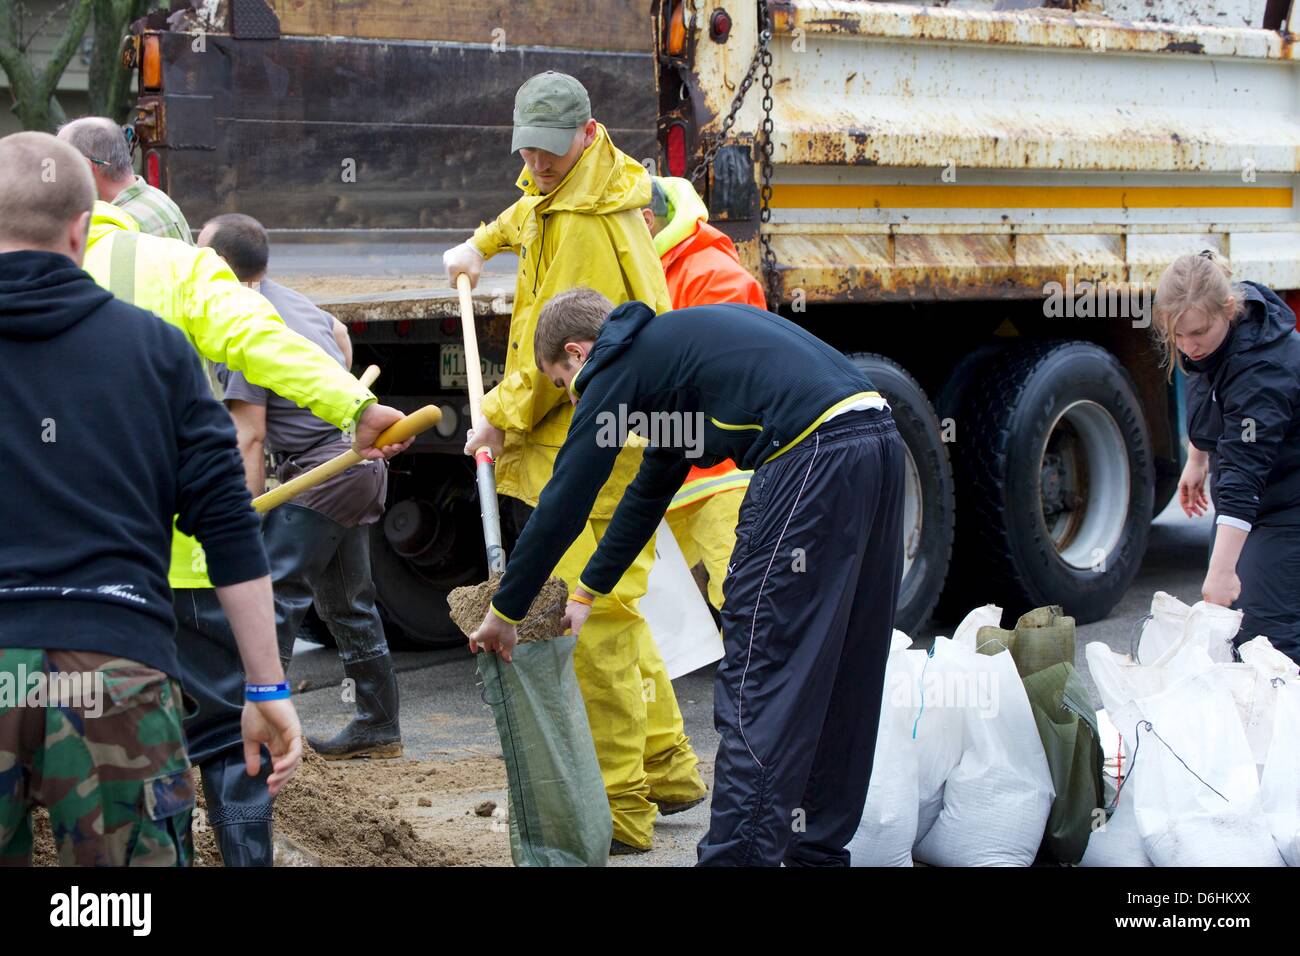 River Forest, Illinois, USA. 18th April 2013.  Volunteers fill sandbags on River Oaks Drive adjacent to the Des Plaines River. The river is expected to flood to record levels due to heavy rains. Stock Photo